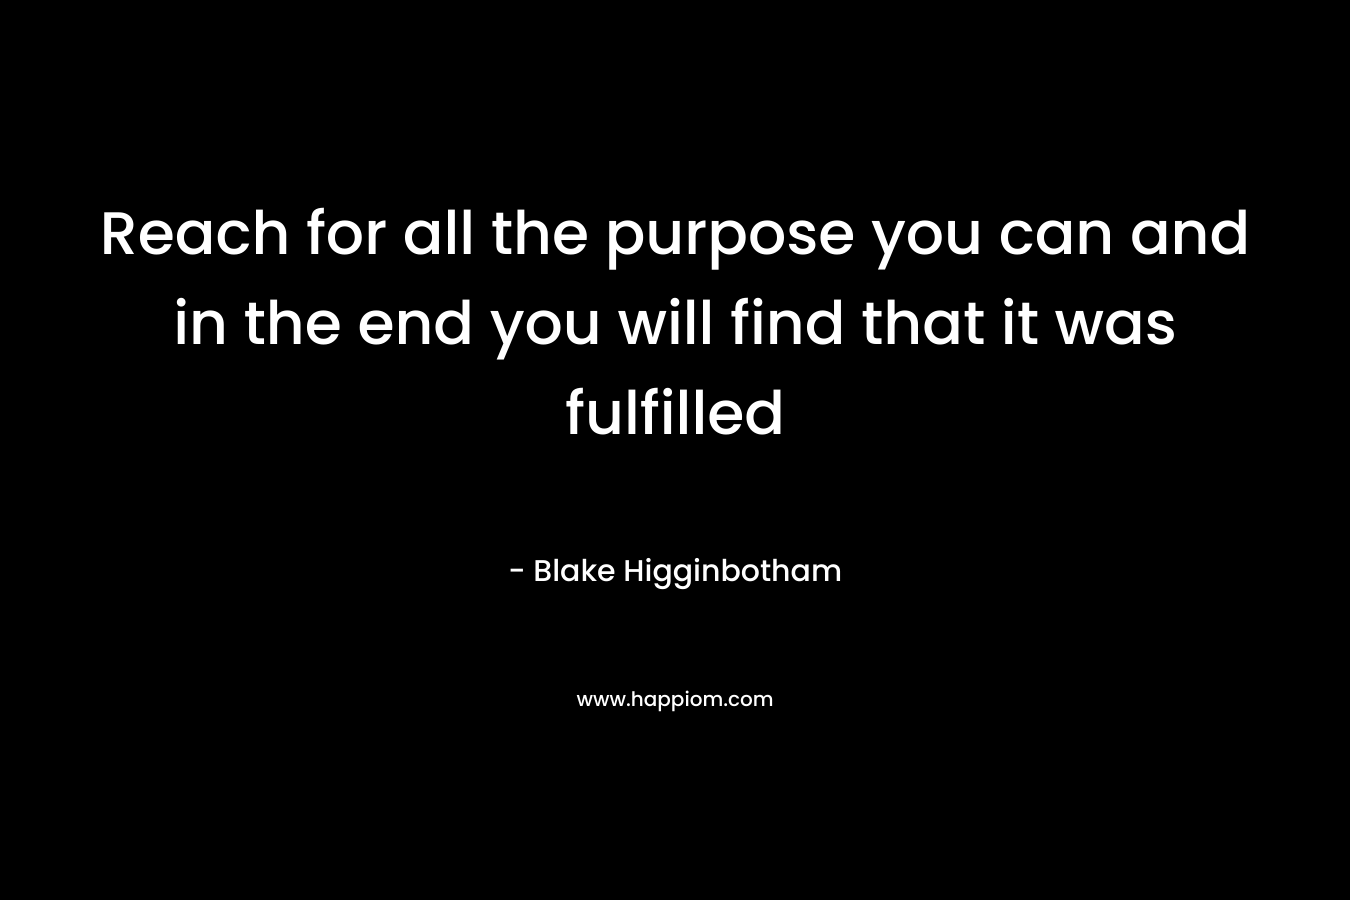 Reach for all the purpose you can and in the end you will find that it was fulfilled – Blake Higginbotham